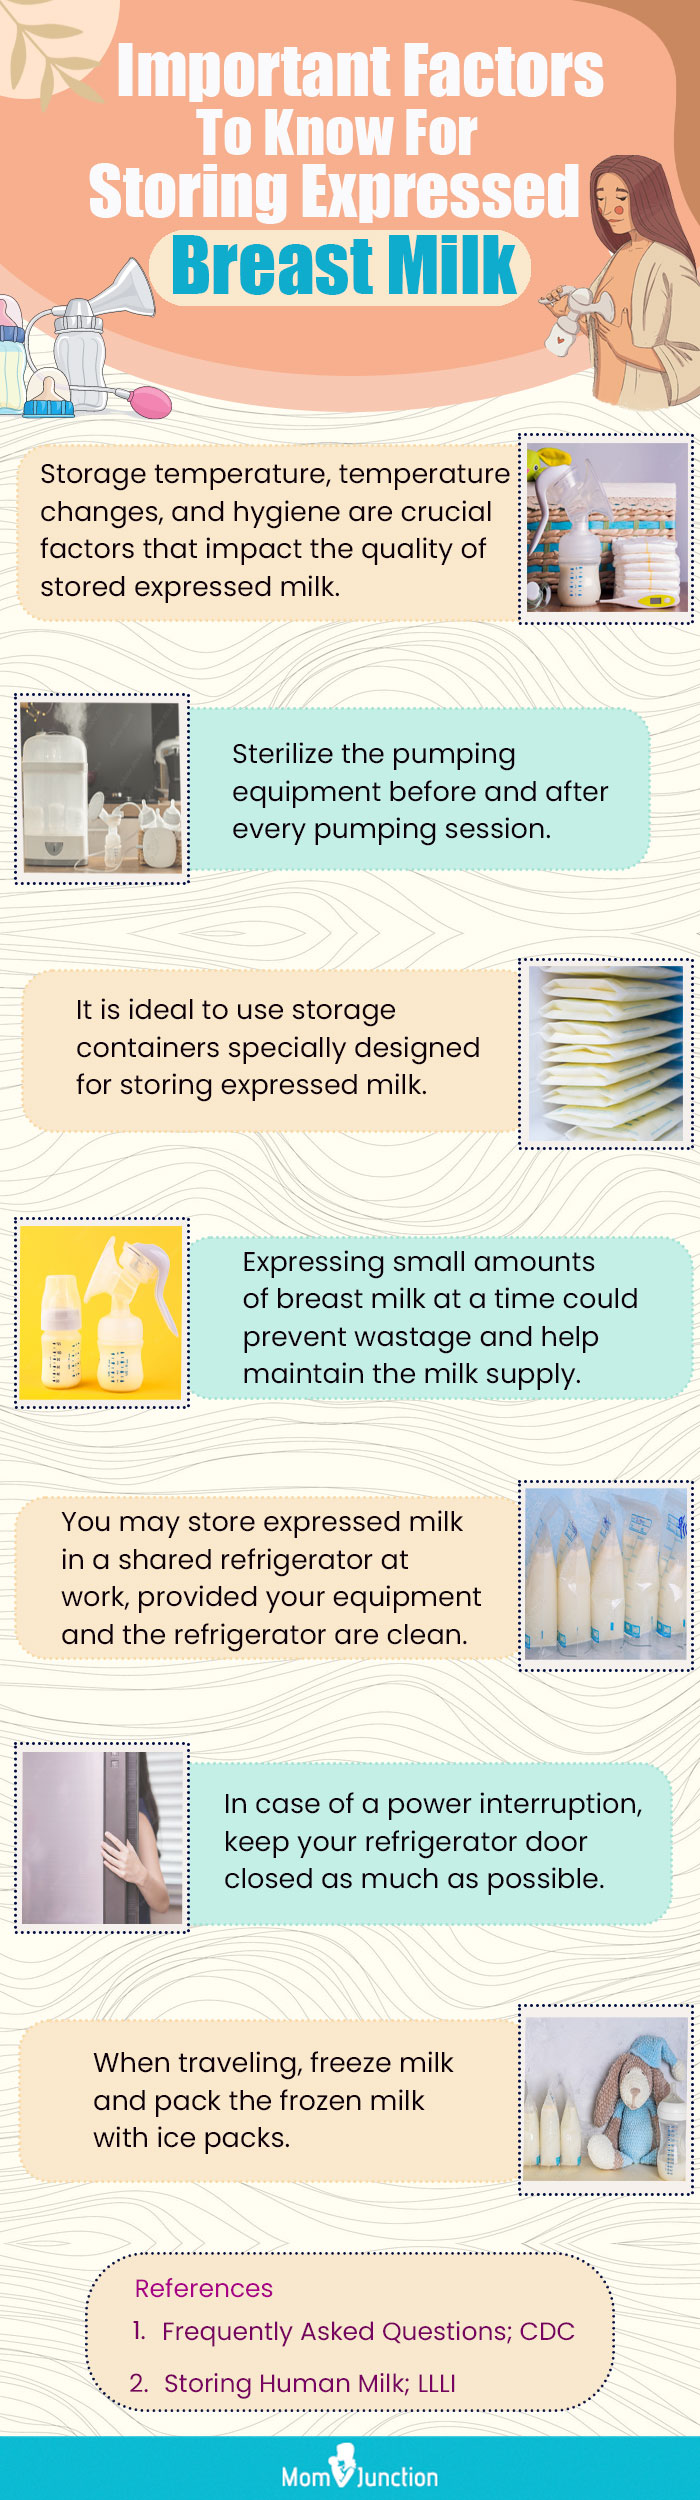 important factors to know for storing expressed breast milk [infographic]